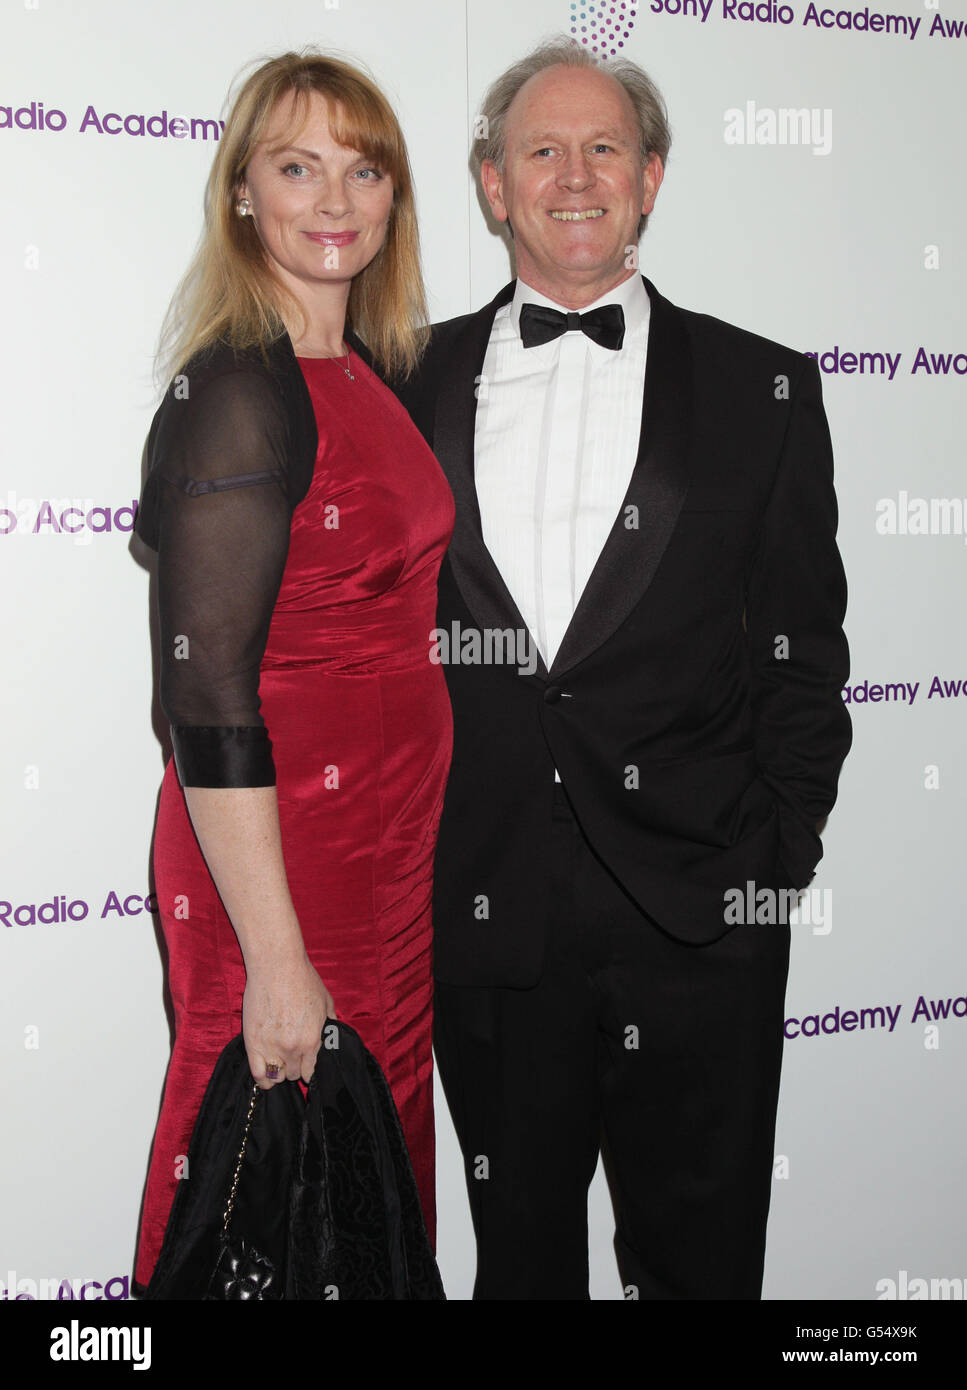 Peter Davison and wife Elizabeth Morton arriving for the Sony Radio Academy Awards, at the Grosvenor House hotel in central London. PRESS ASSOCIATION Photo. Picture date: Monday May 14, 2012. Photo credit should read: Yui Mok/PA Wire Stock Photo